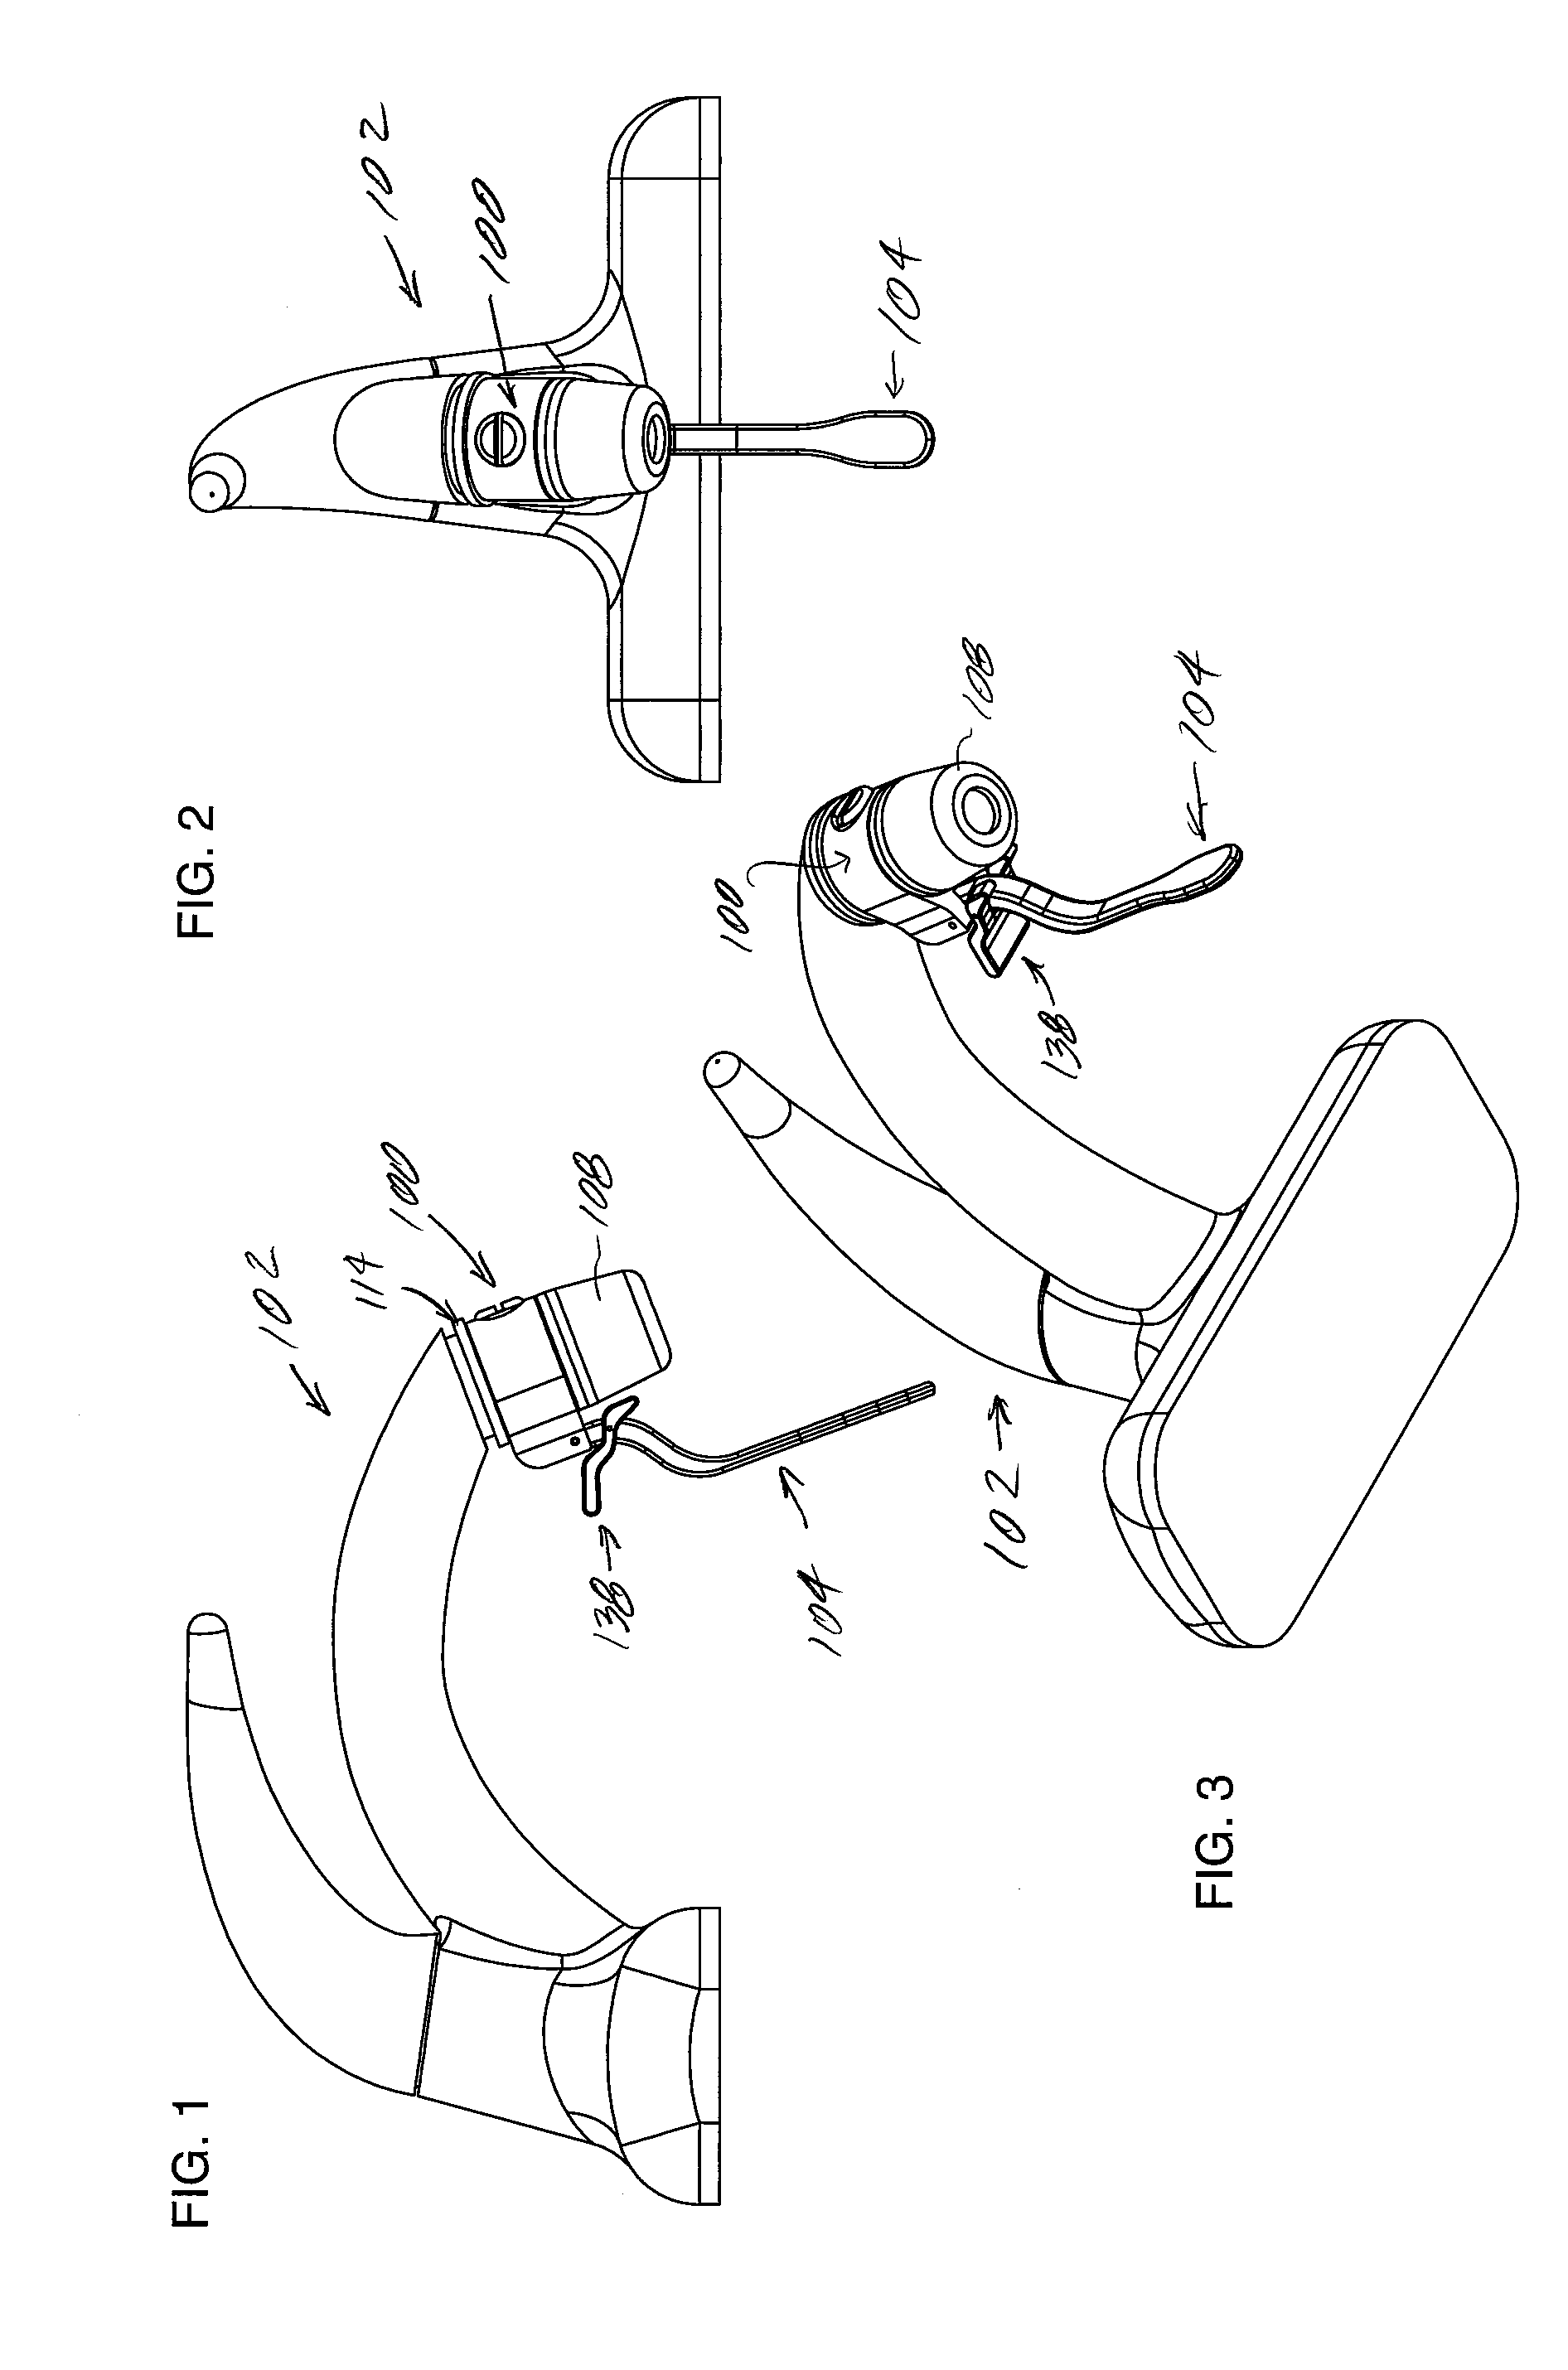 Flow Valve For Example for Faucets